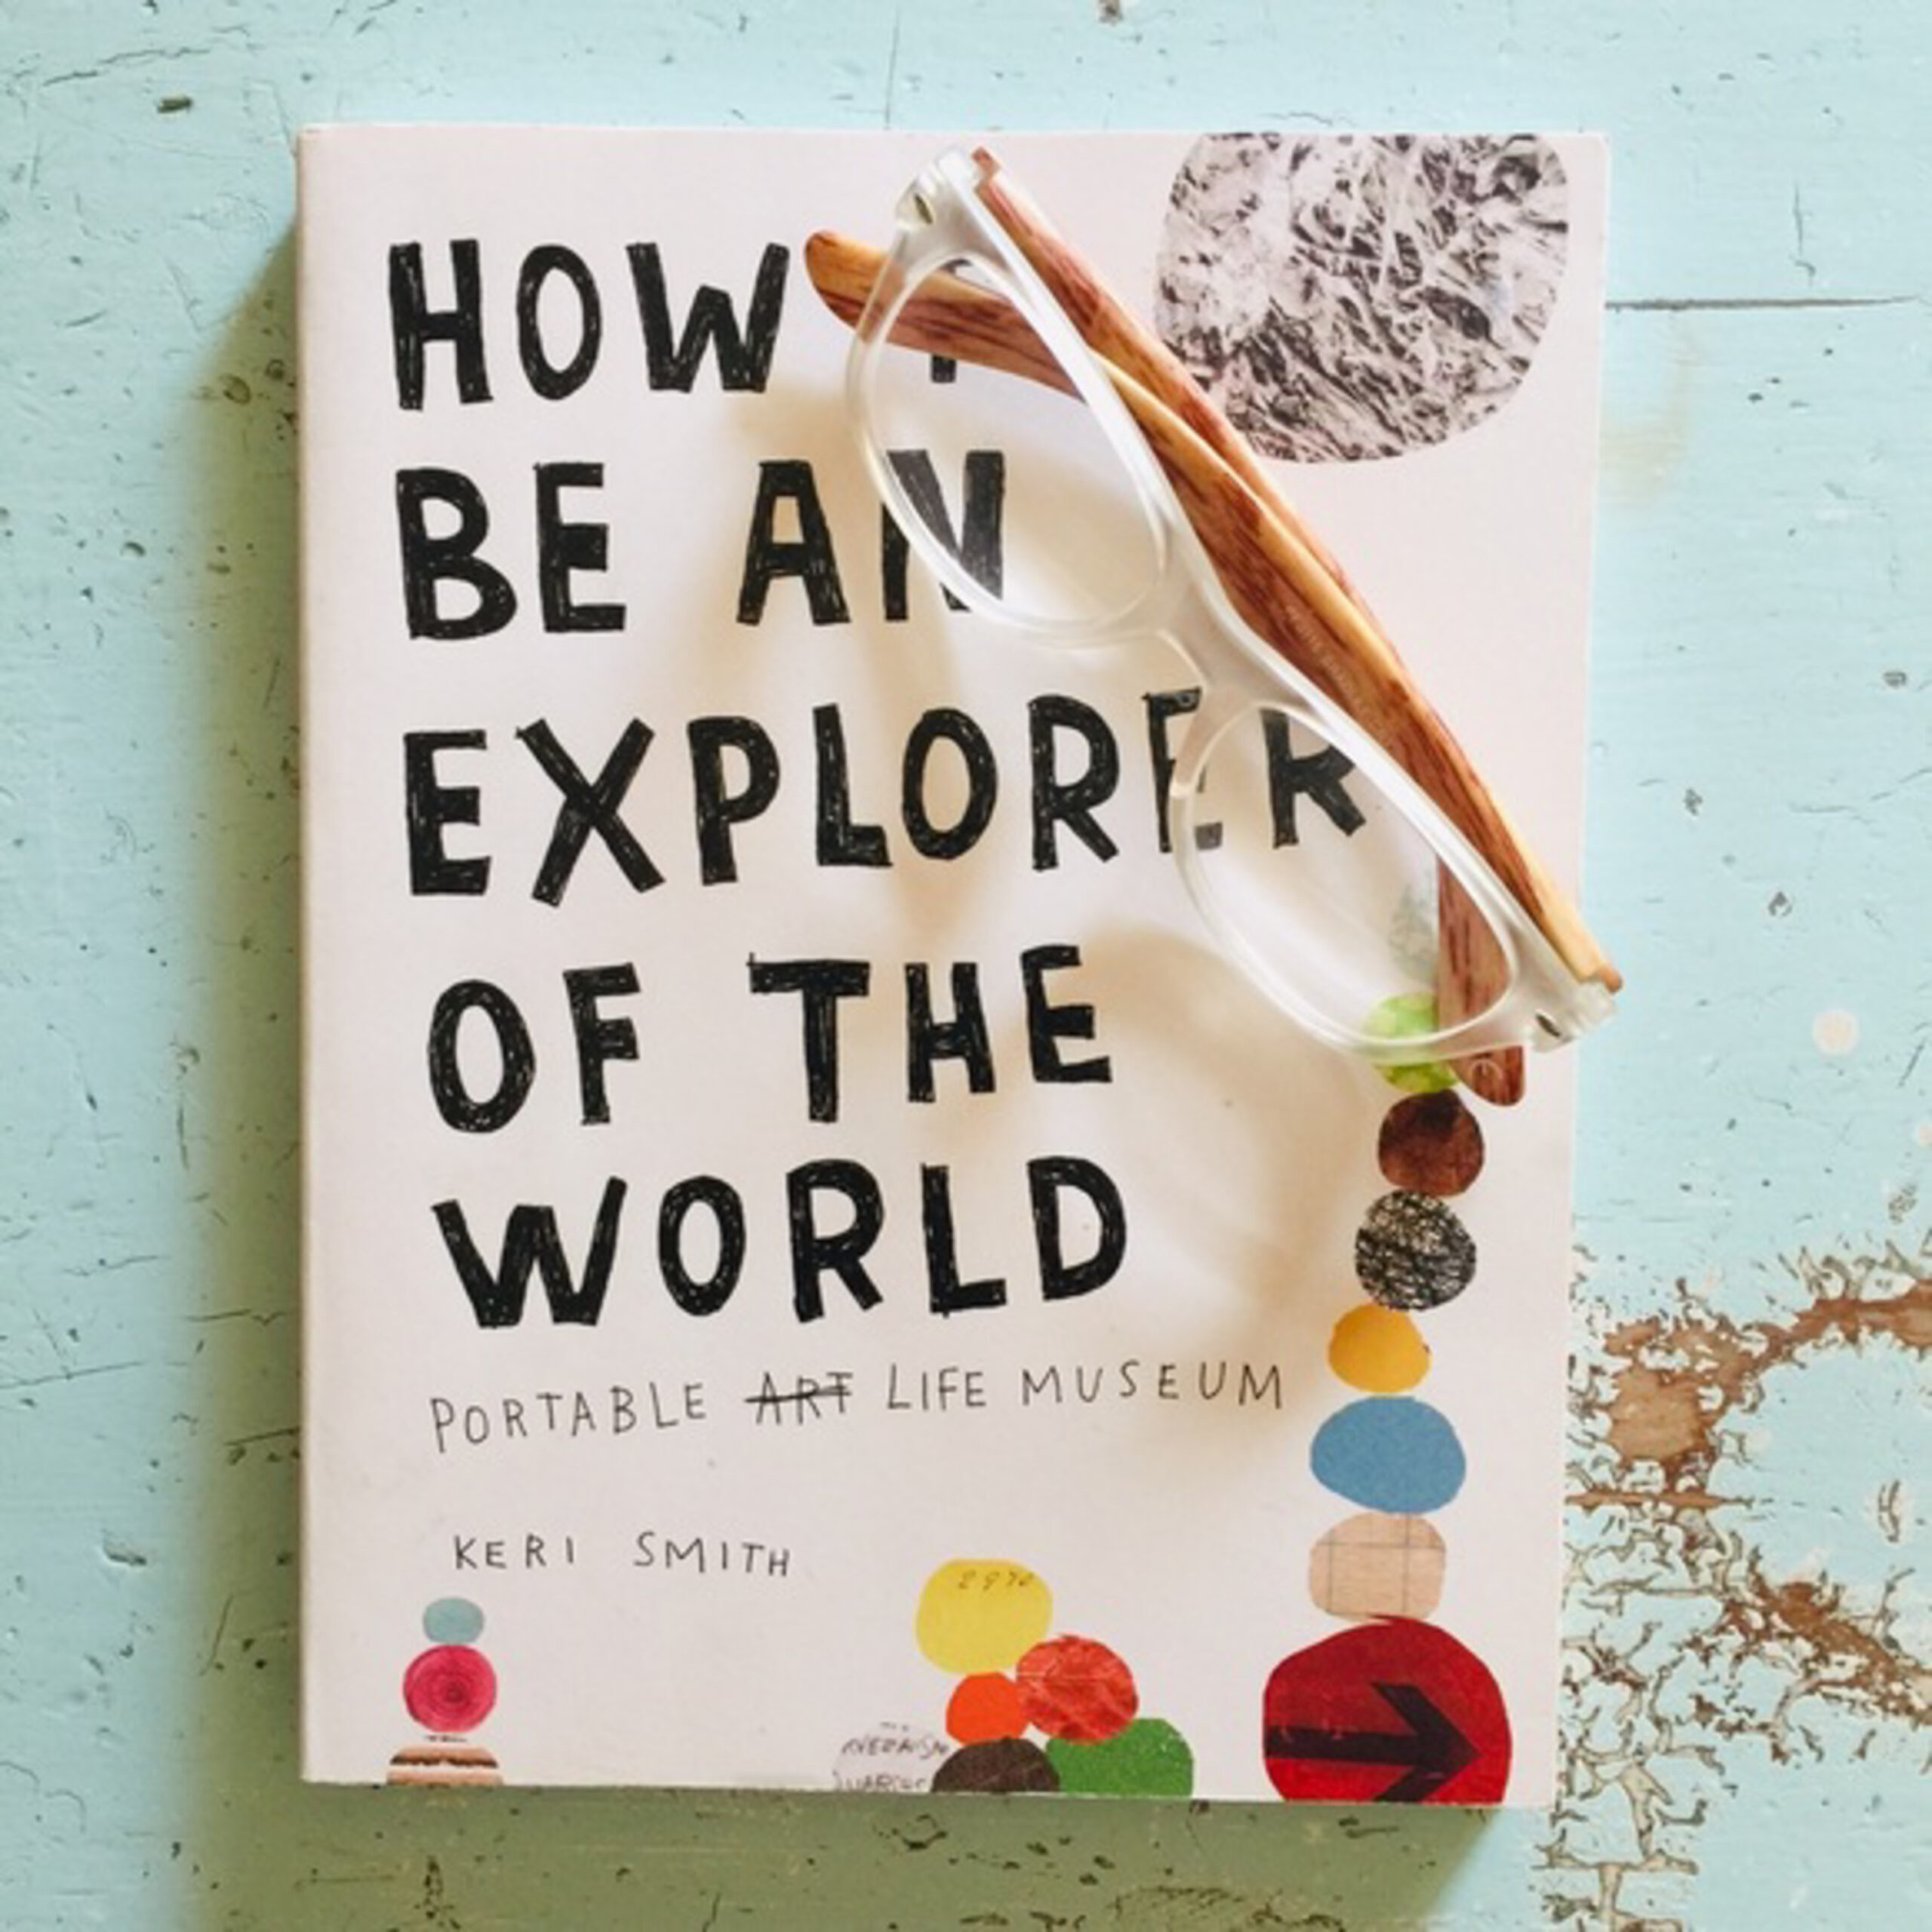 22 - Silvia Naber - How to be an explorer of the world